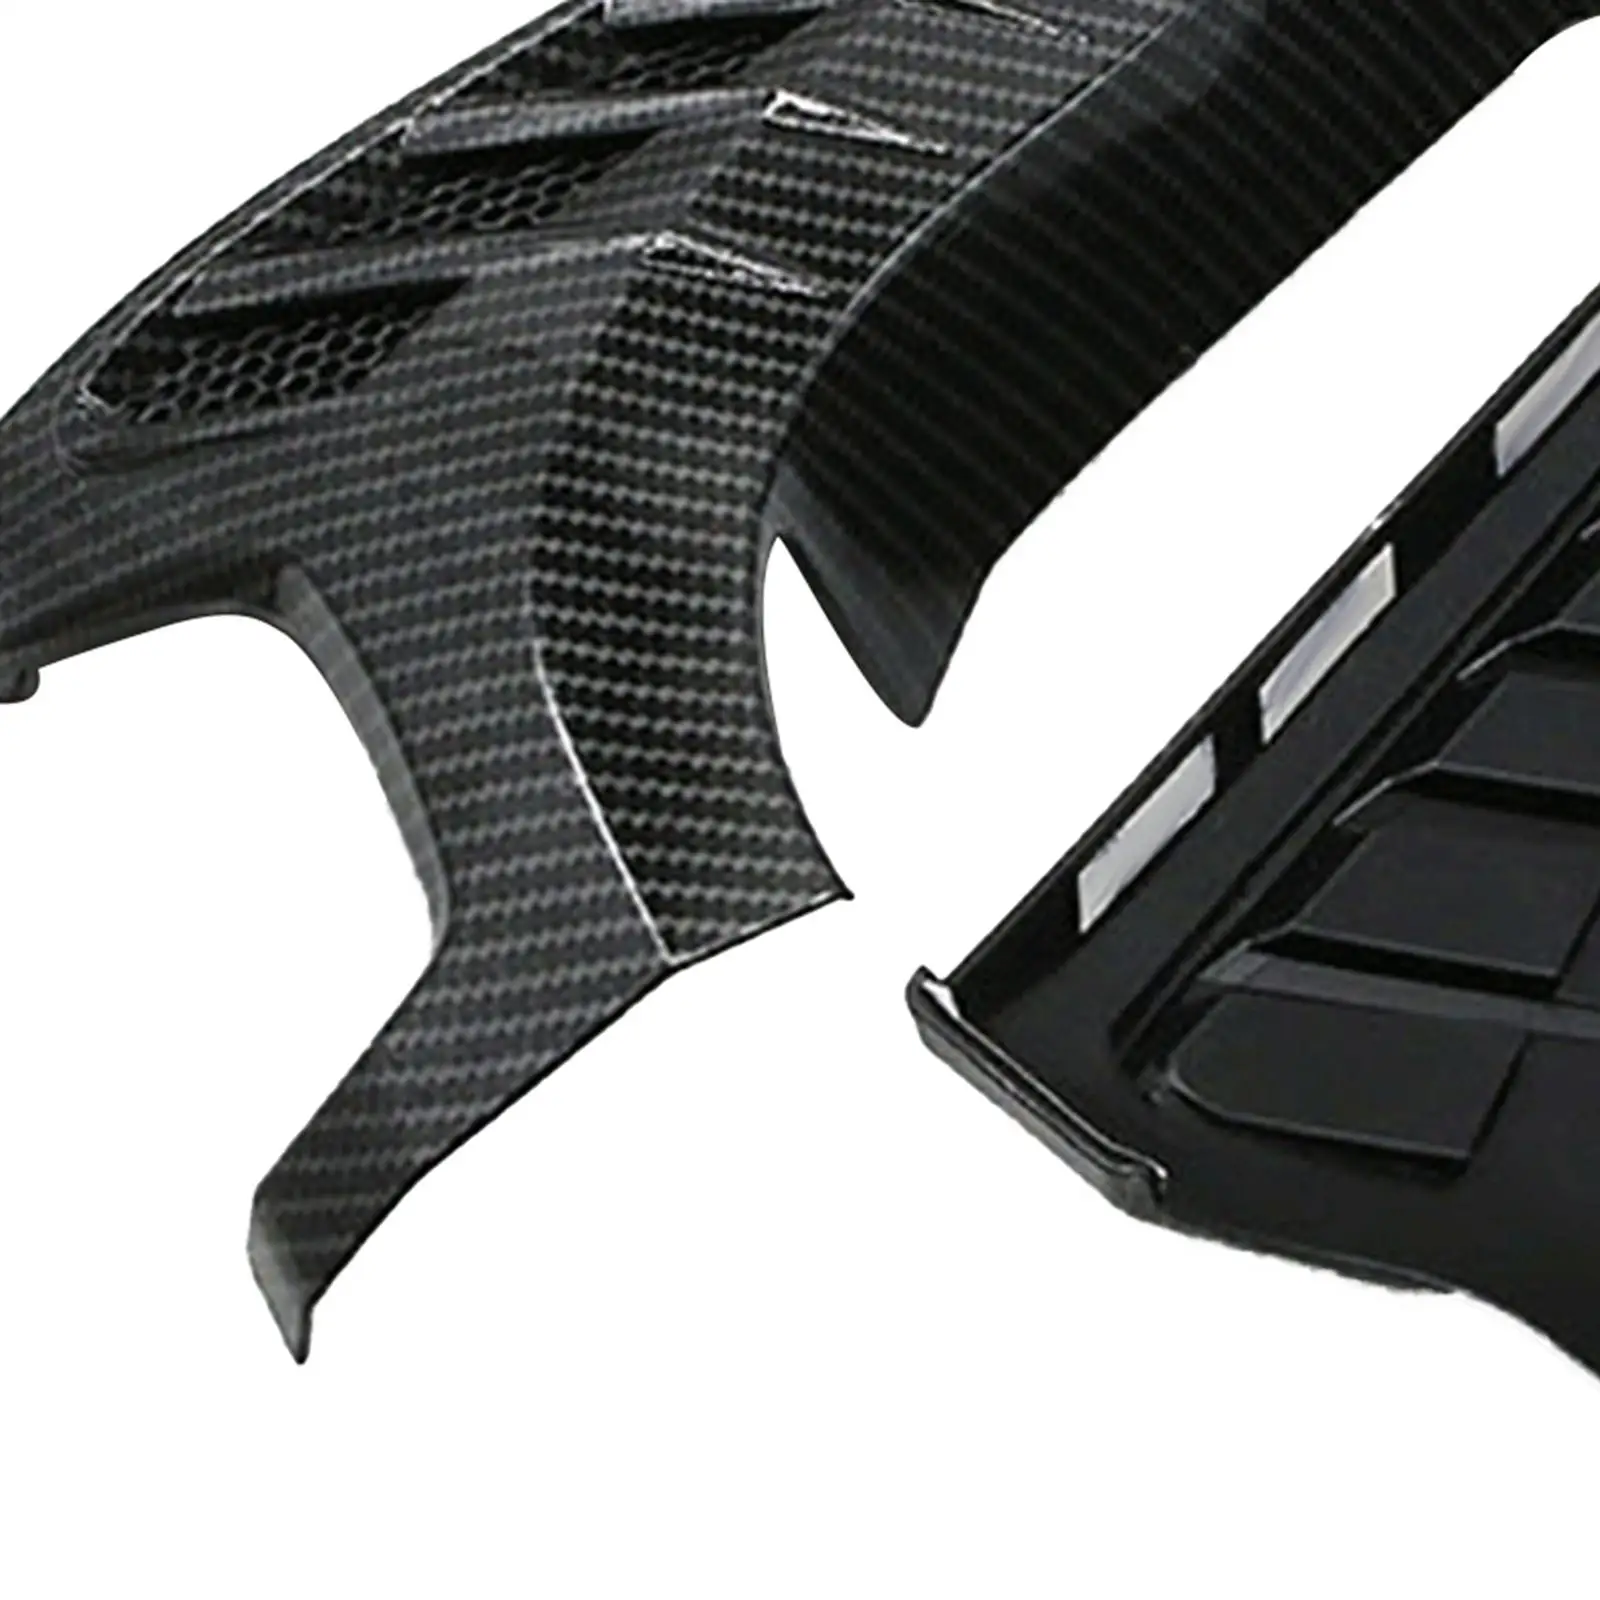 2 Pcs Carbon Fiber Turn Signal Light Cover Front Lamp Guards for Yamaha Nmax155 N-Max 155 2020 2021 Motorcycle Parts